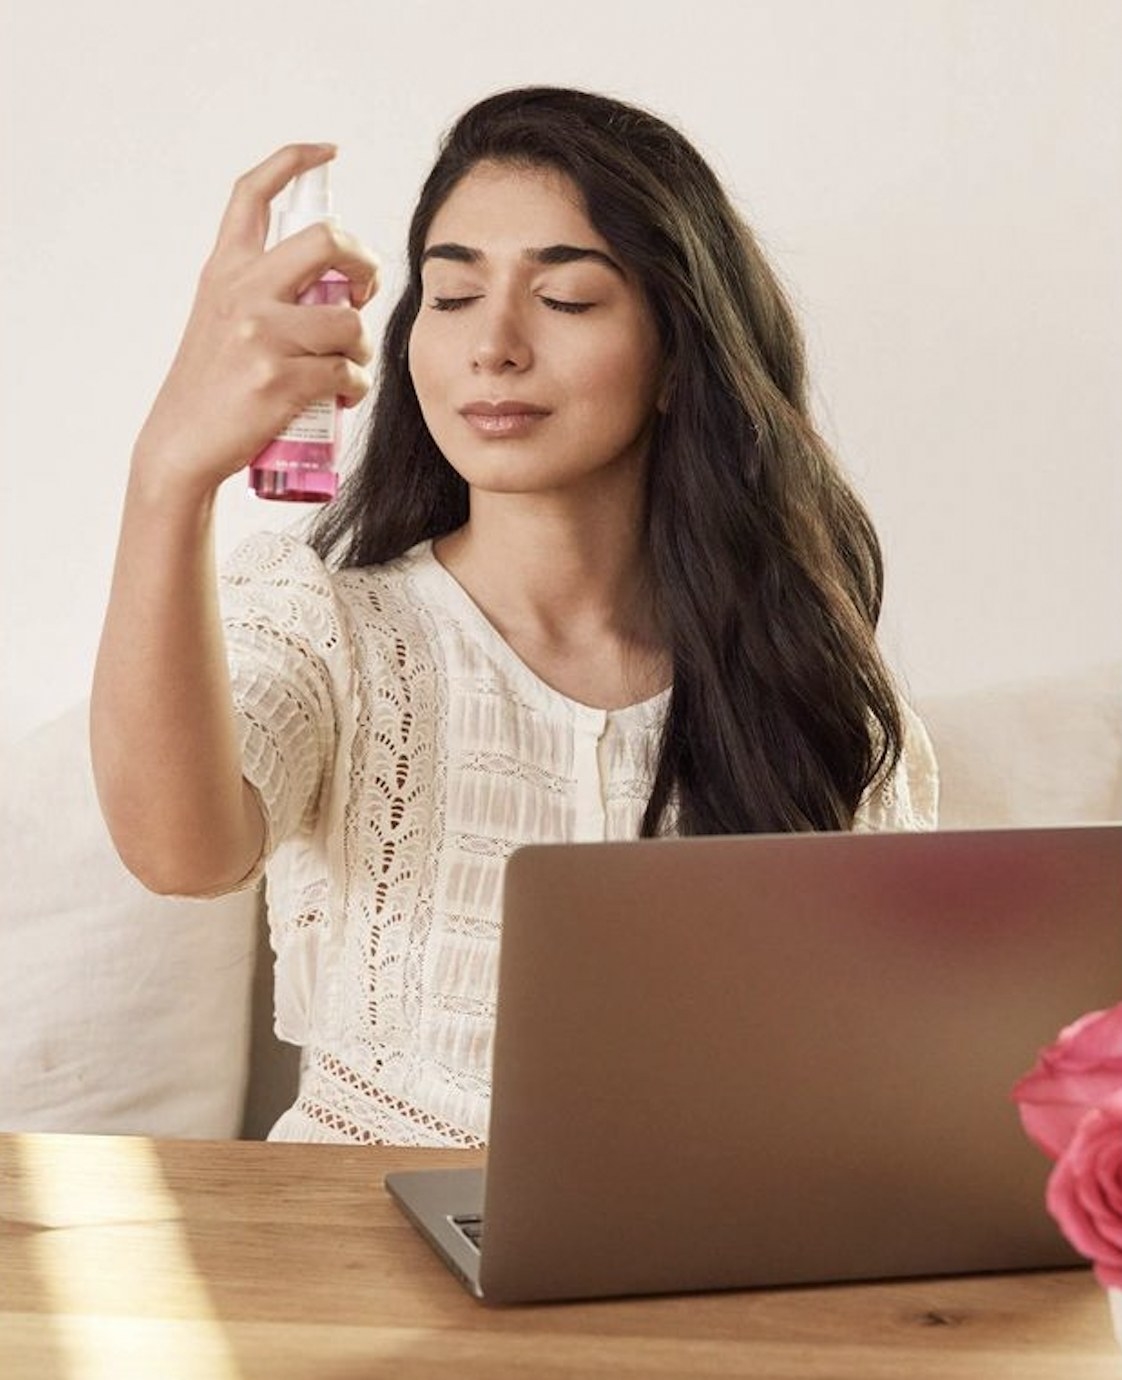 A person sitting at a table in front of a laptop spritzing facial mist on their face